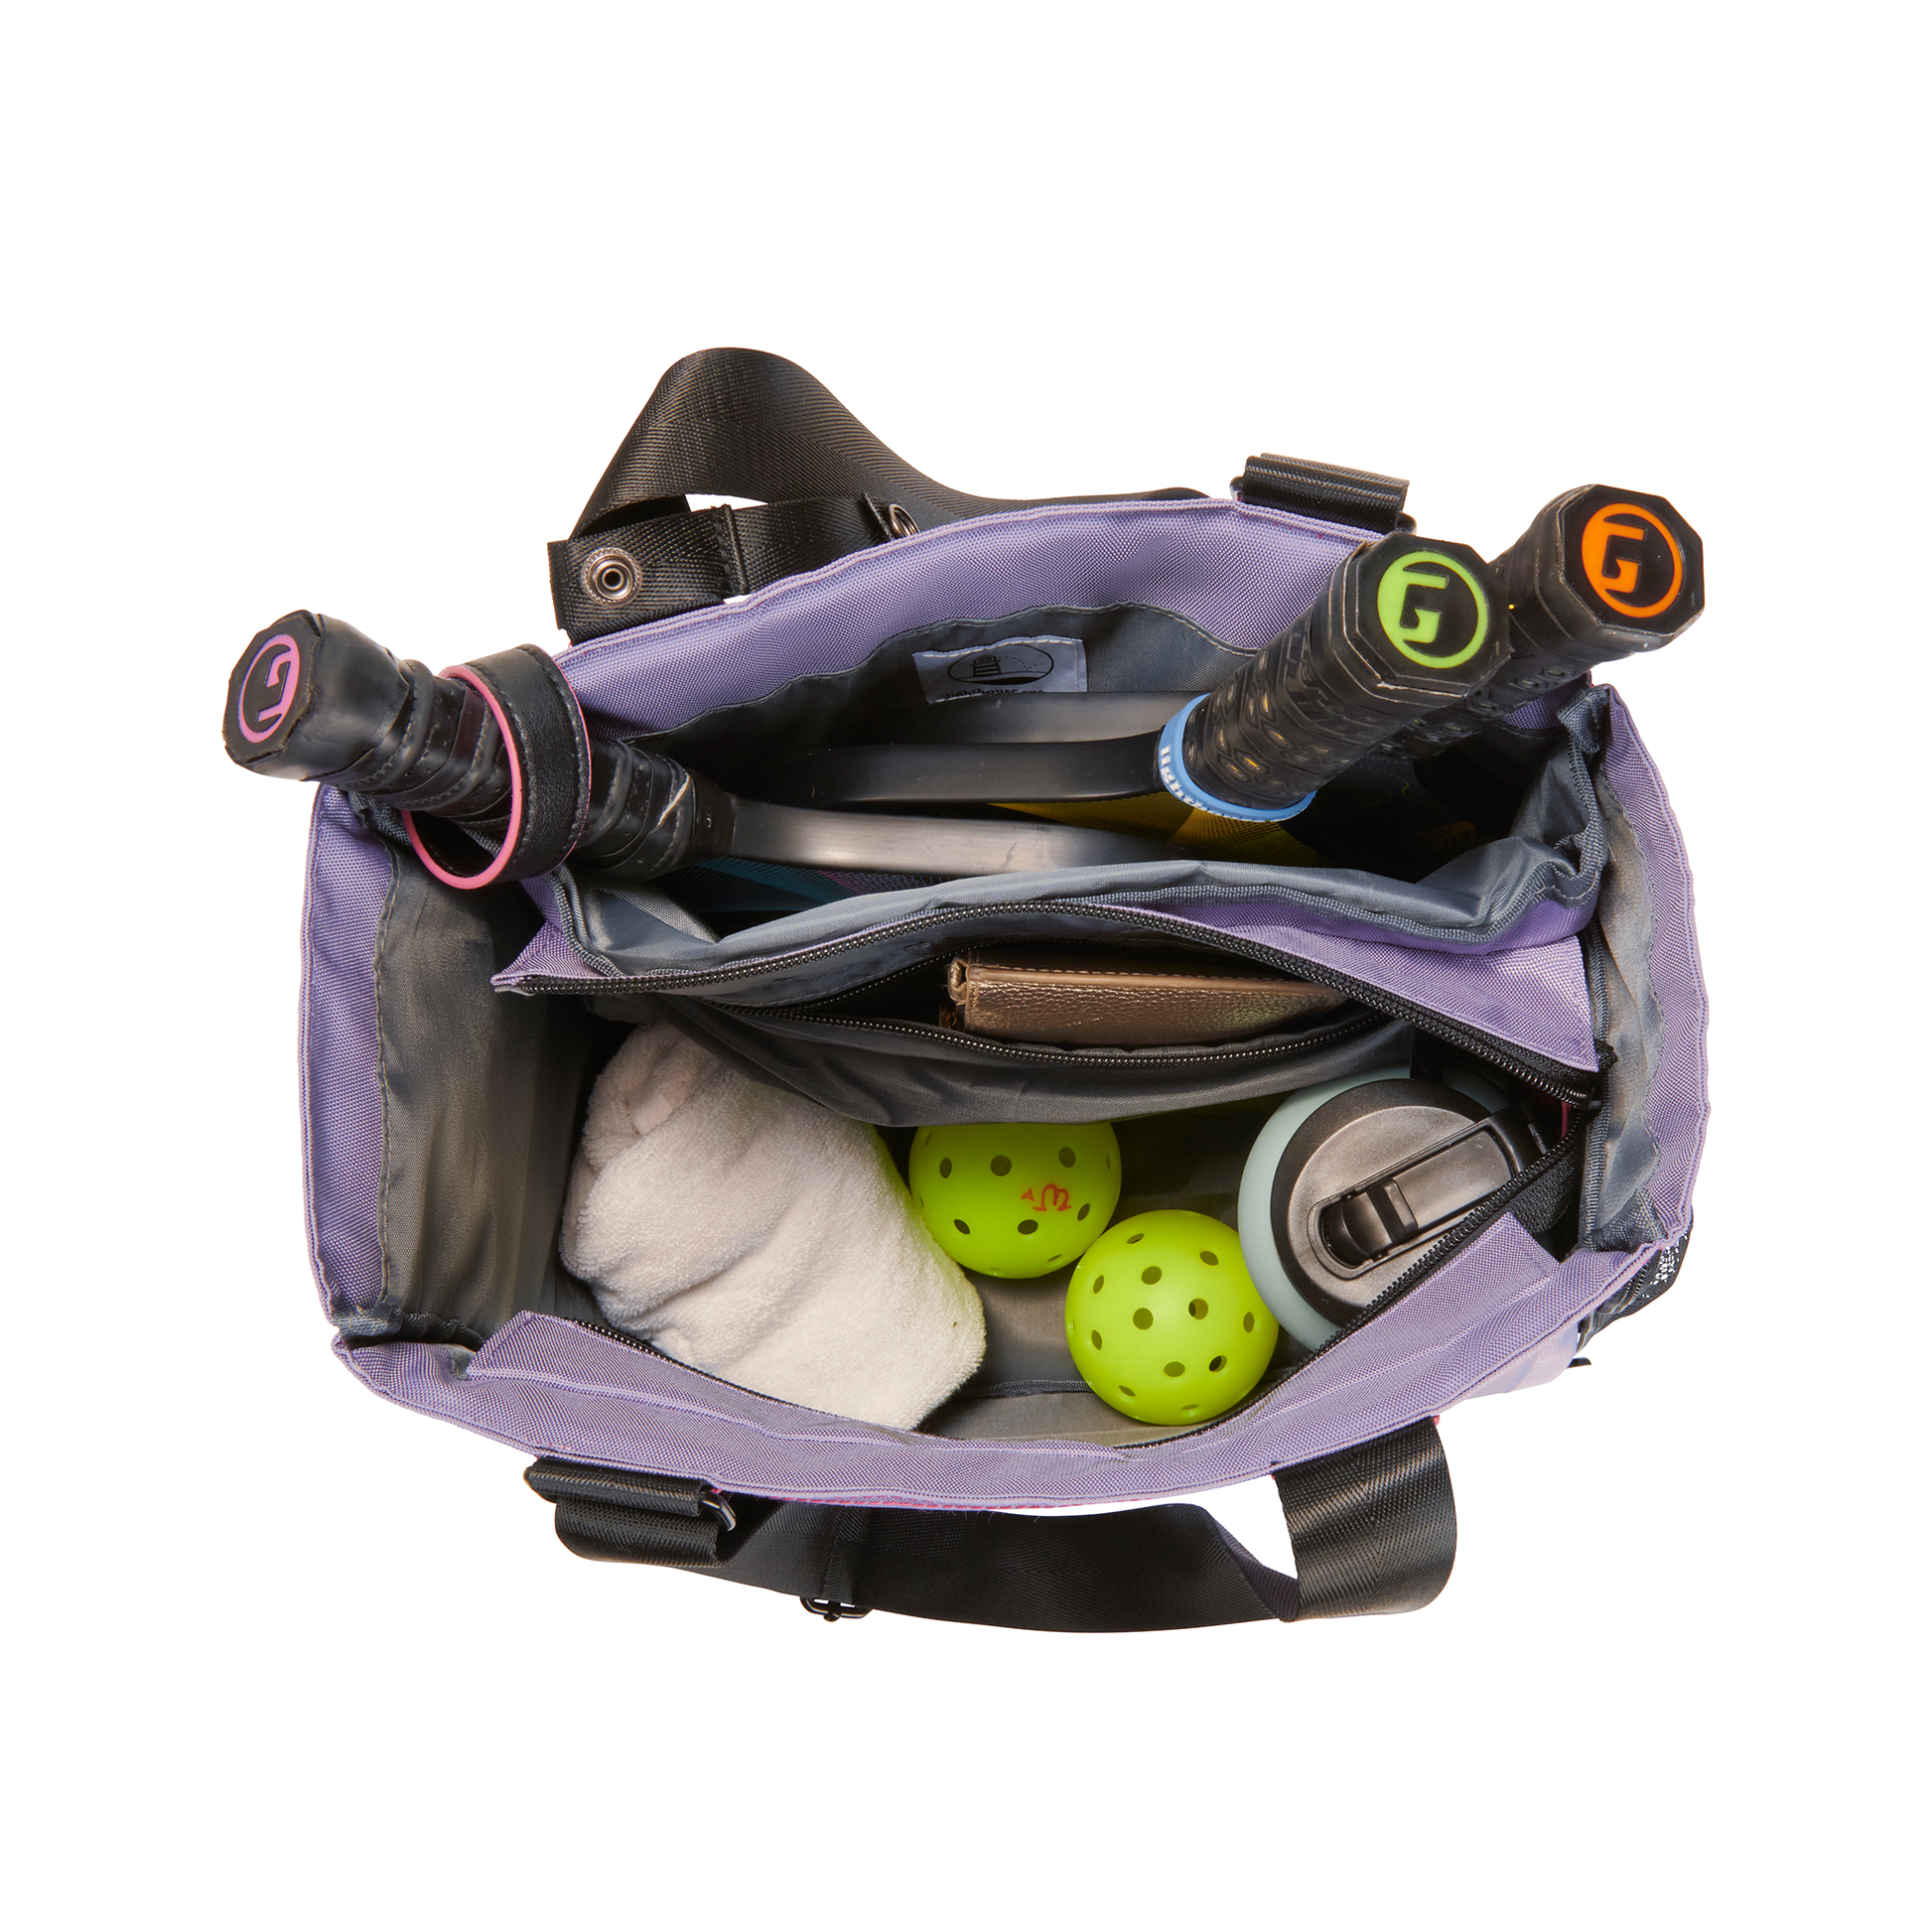 Overhead view of women’s designer pickleball tote packed with game essentials – paddles, towel, balls, water bottle, phone 